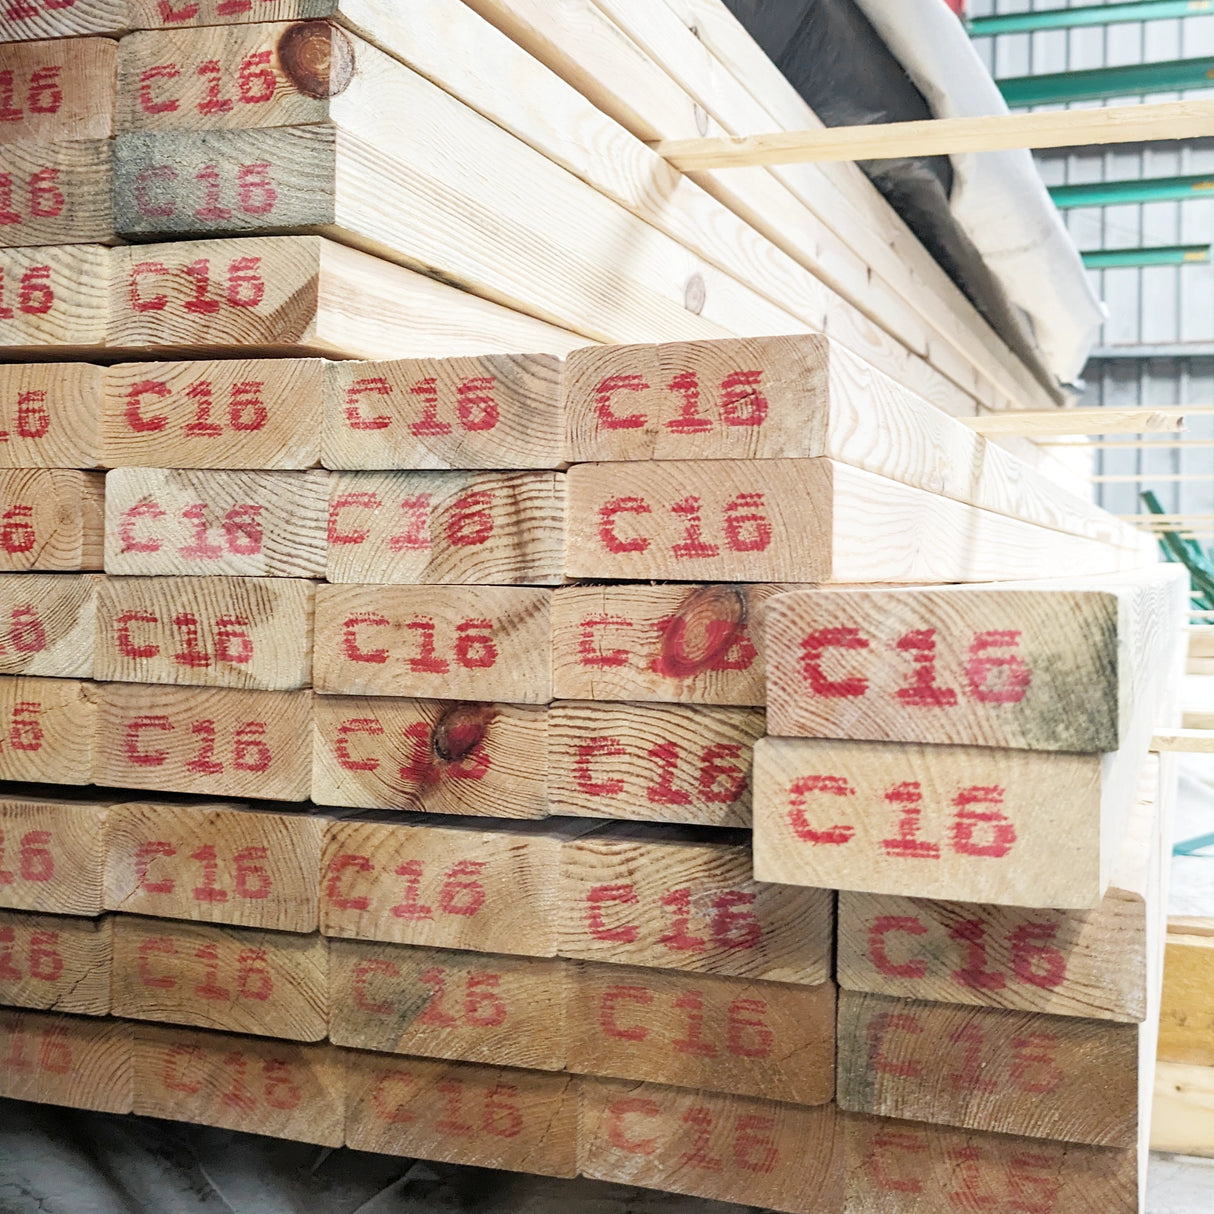 cls-timber-4x2-2.4m